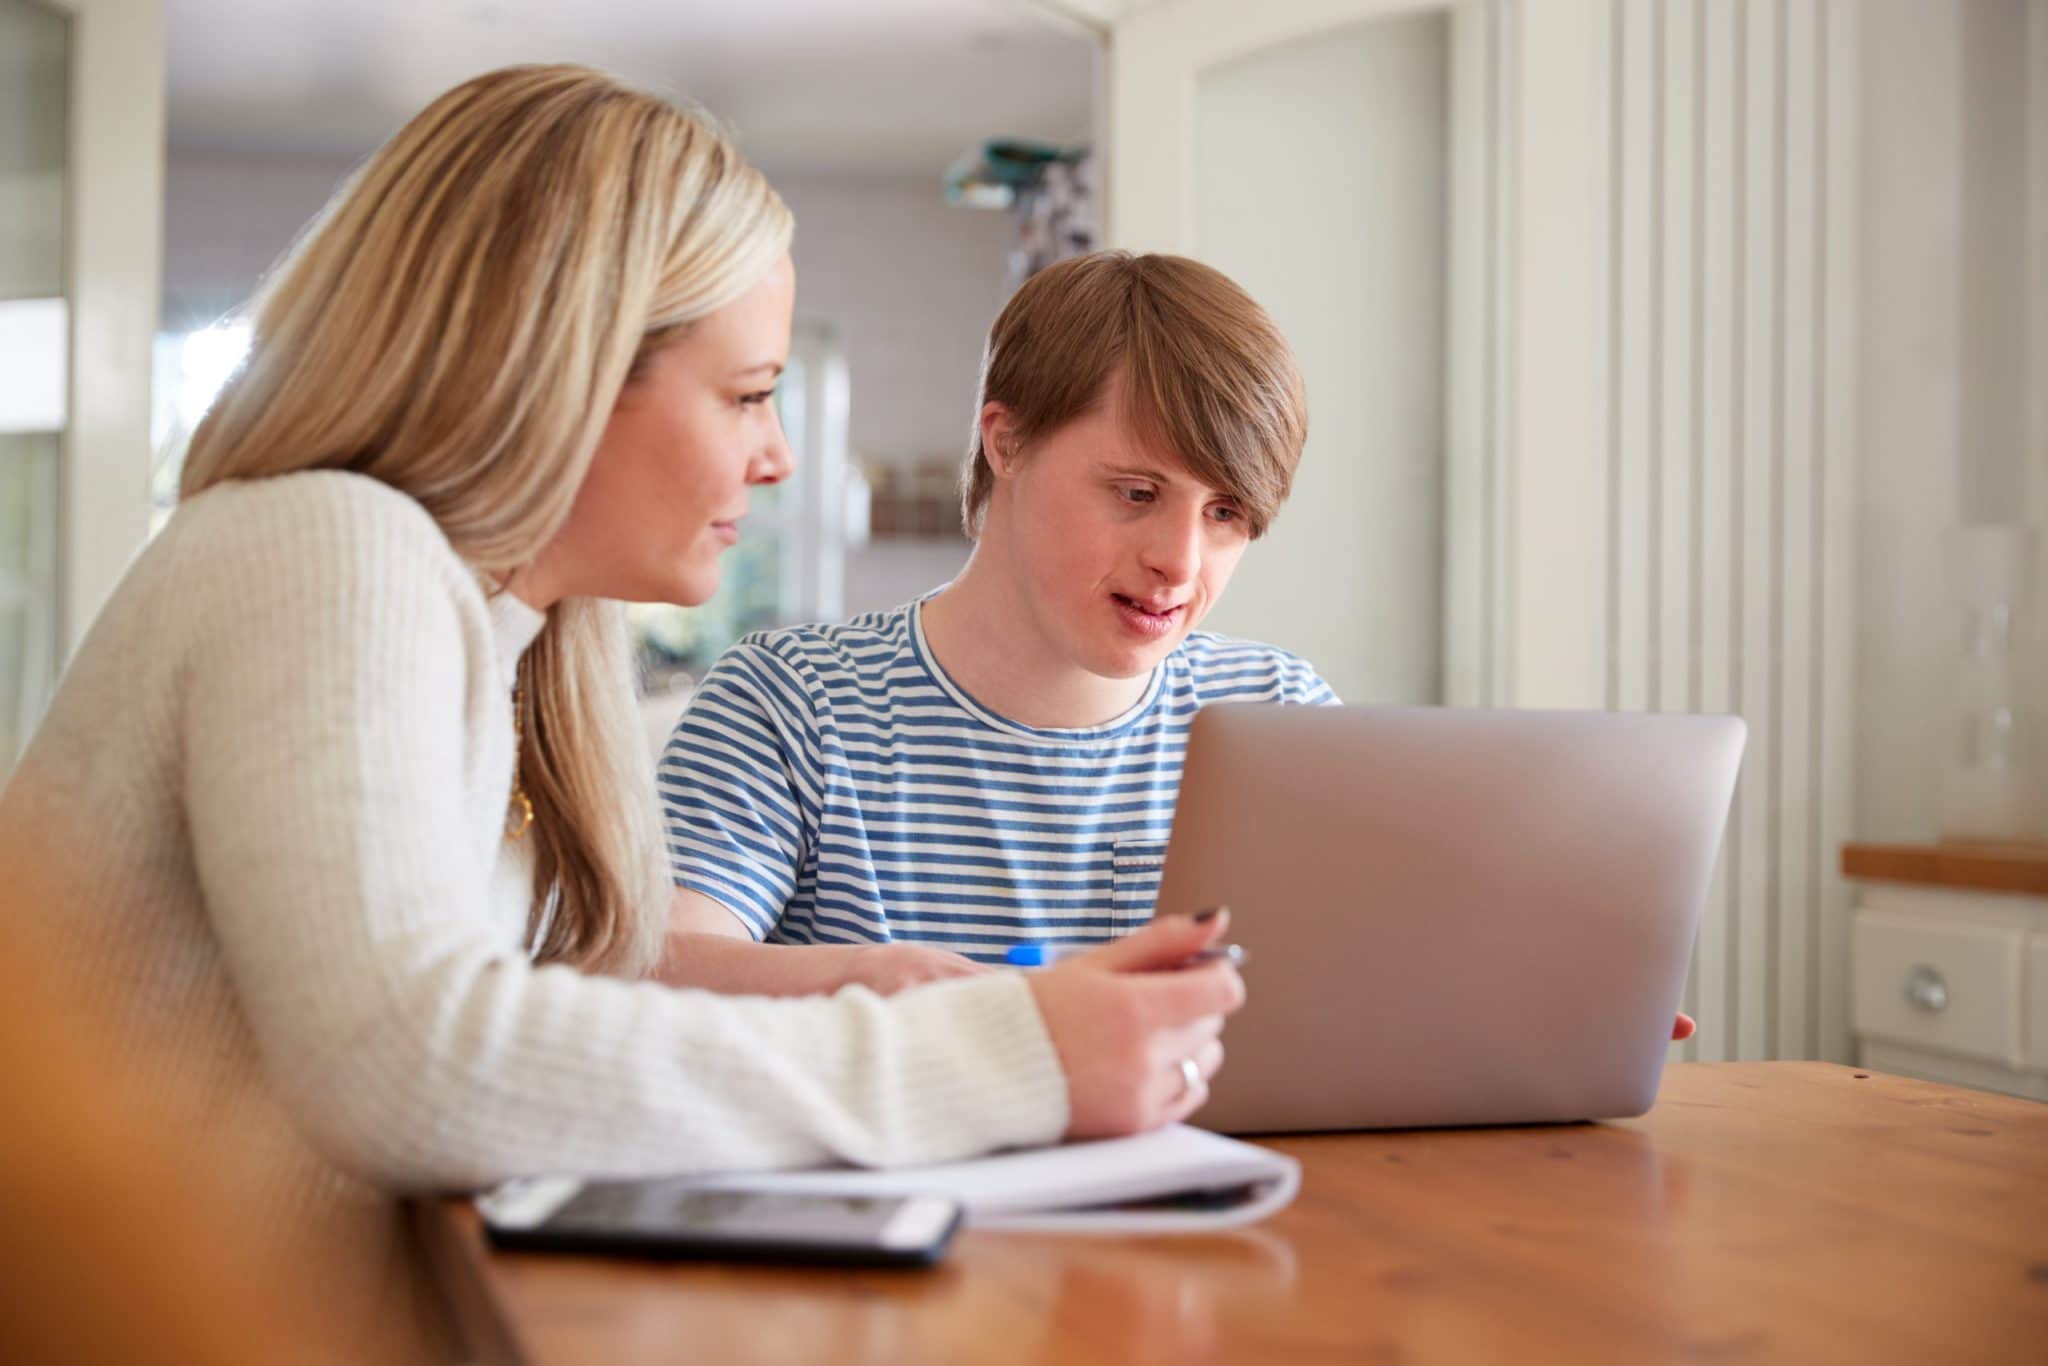 Downs Syndrome Man Sitting With Home Tutor Using Laptop For Lesson At Home